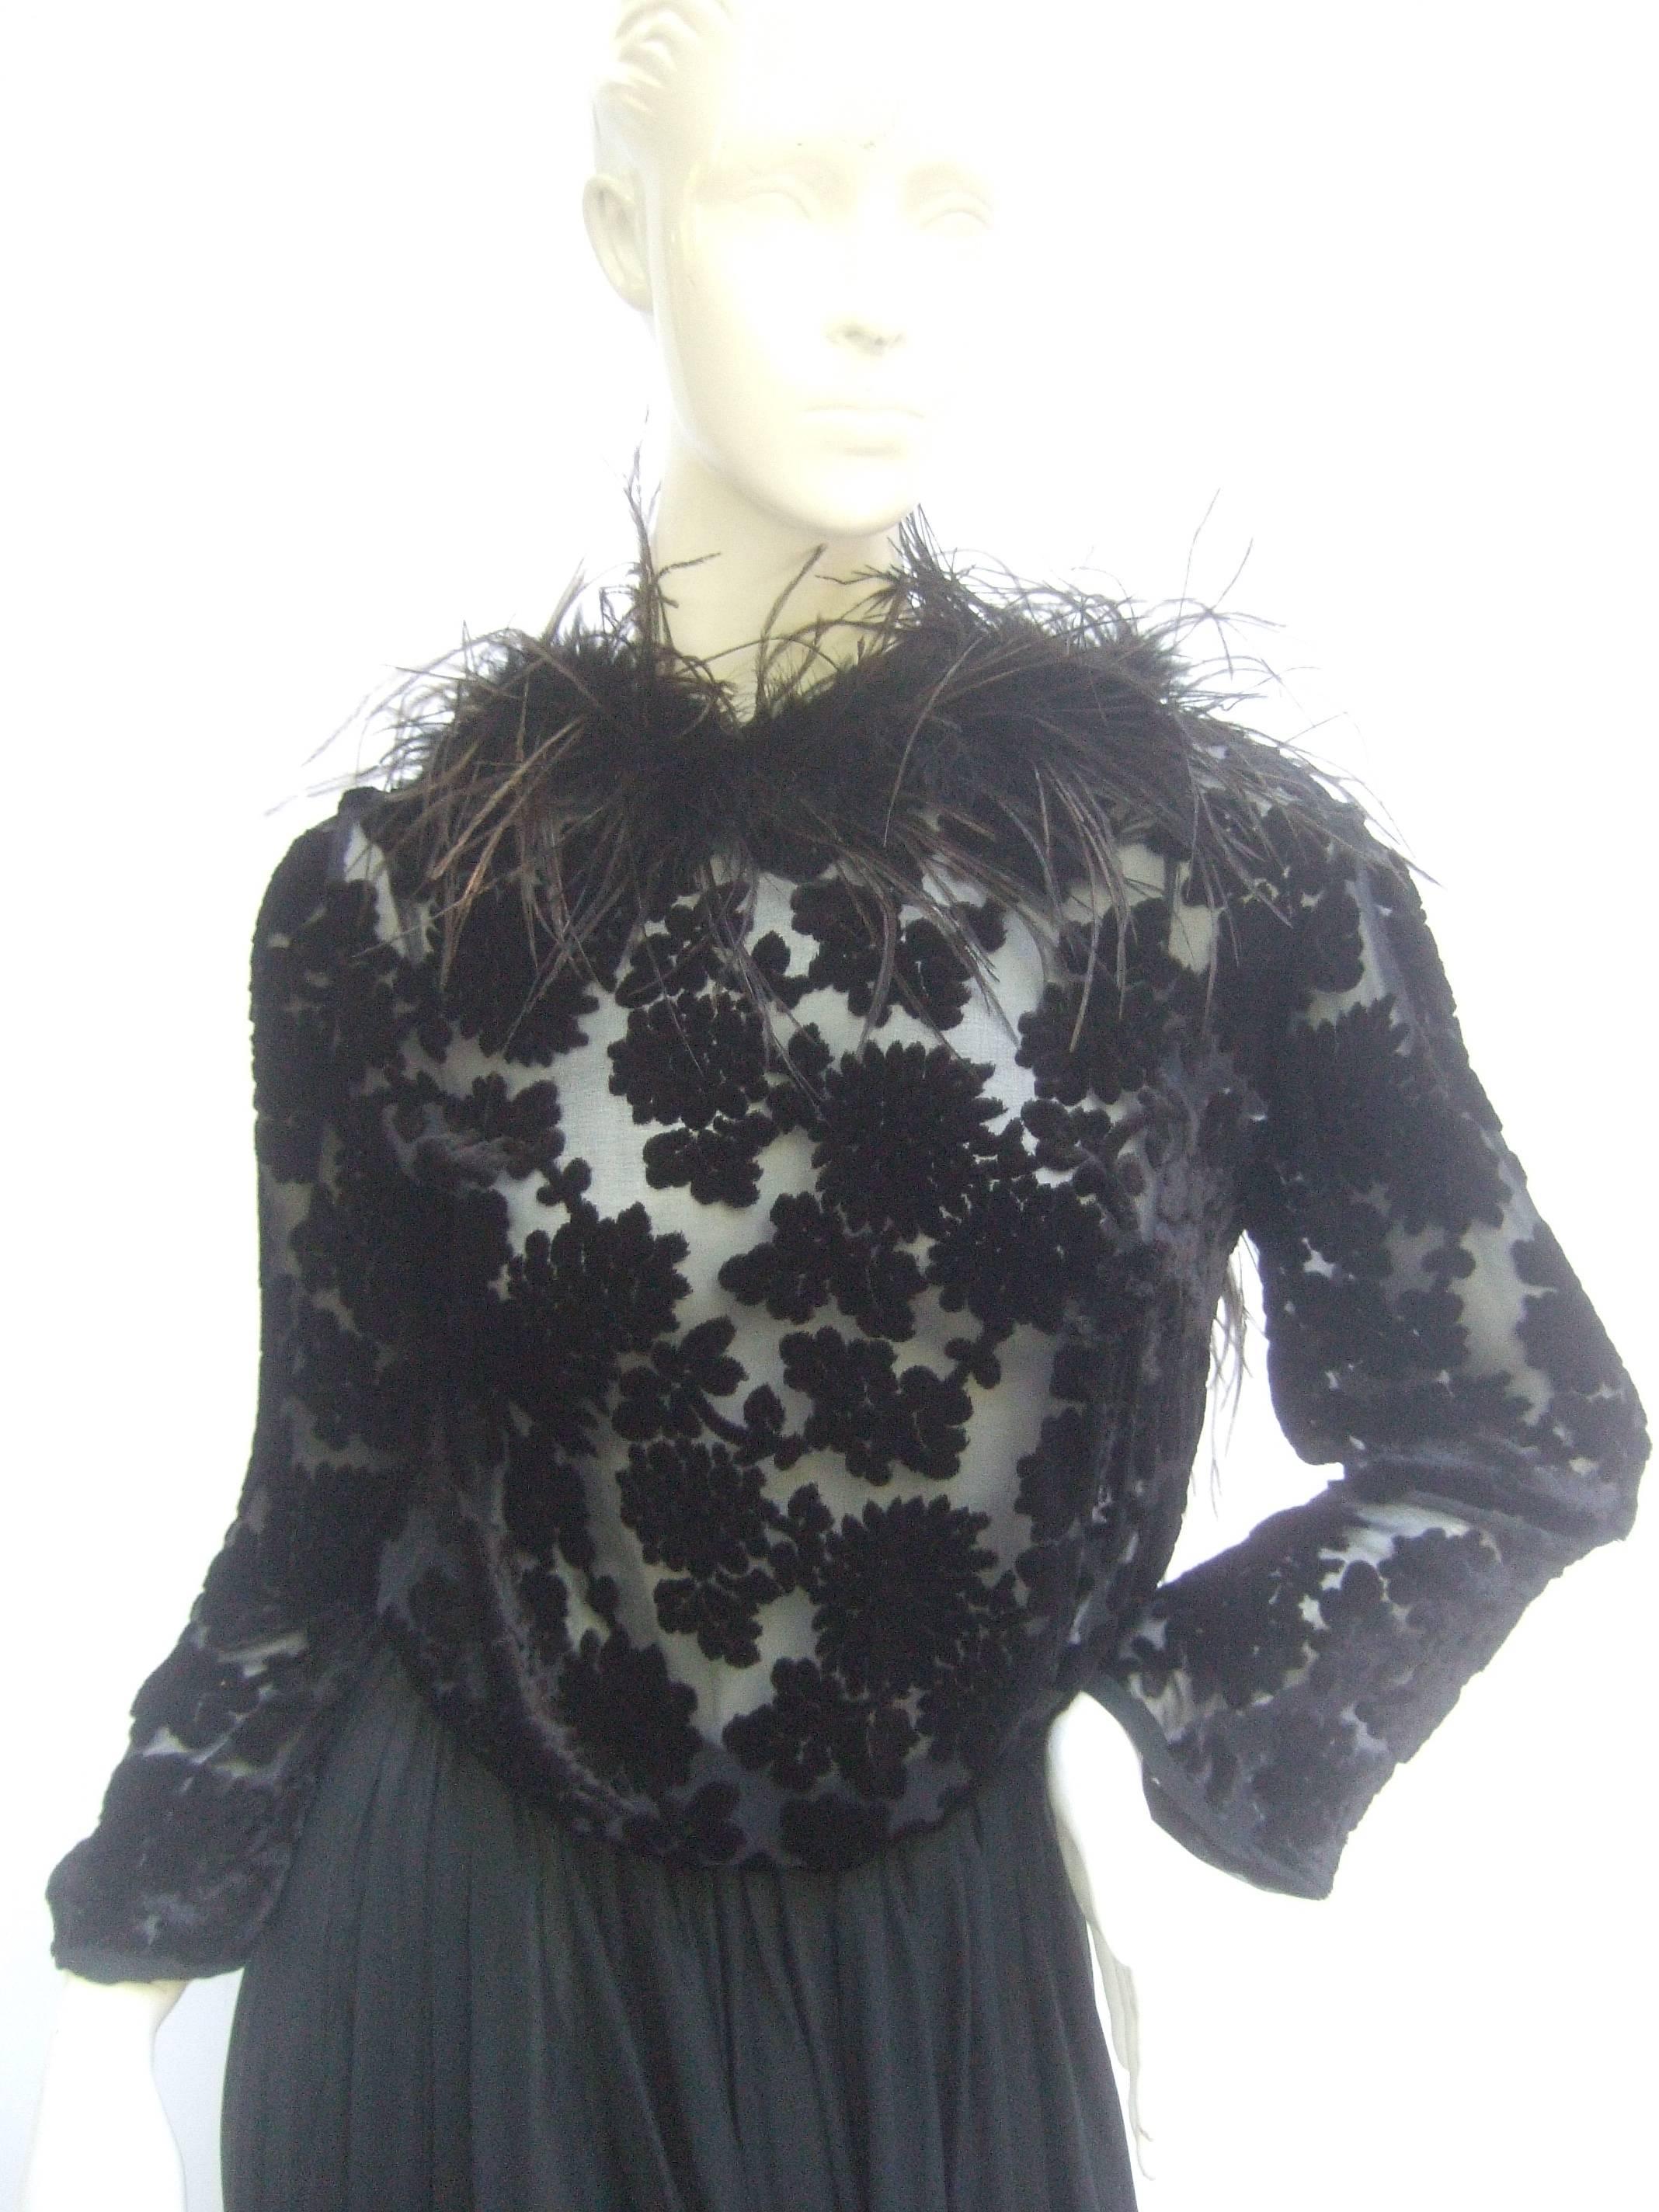 Saks Fifth Avenue Black feather trim silk chiffon devore' gown 
The elegant gown is designed with an ostrich feather collar
The bodice & sleeve are sheer illusion floral devore'

The long sweeping skirt section is sheer silk chiffon 
The voluminous